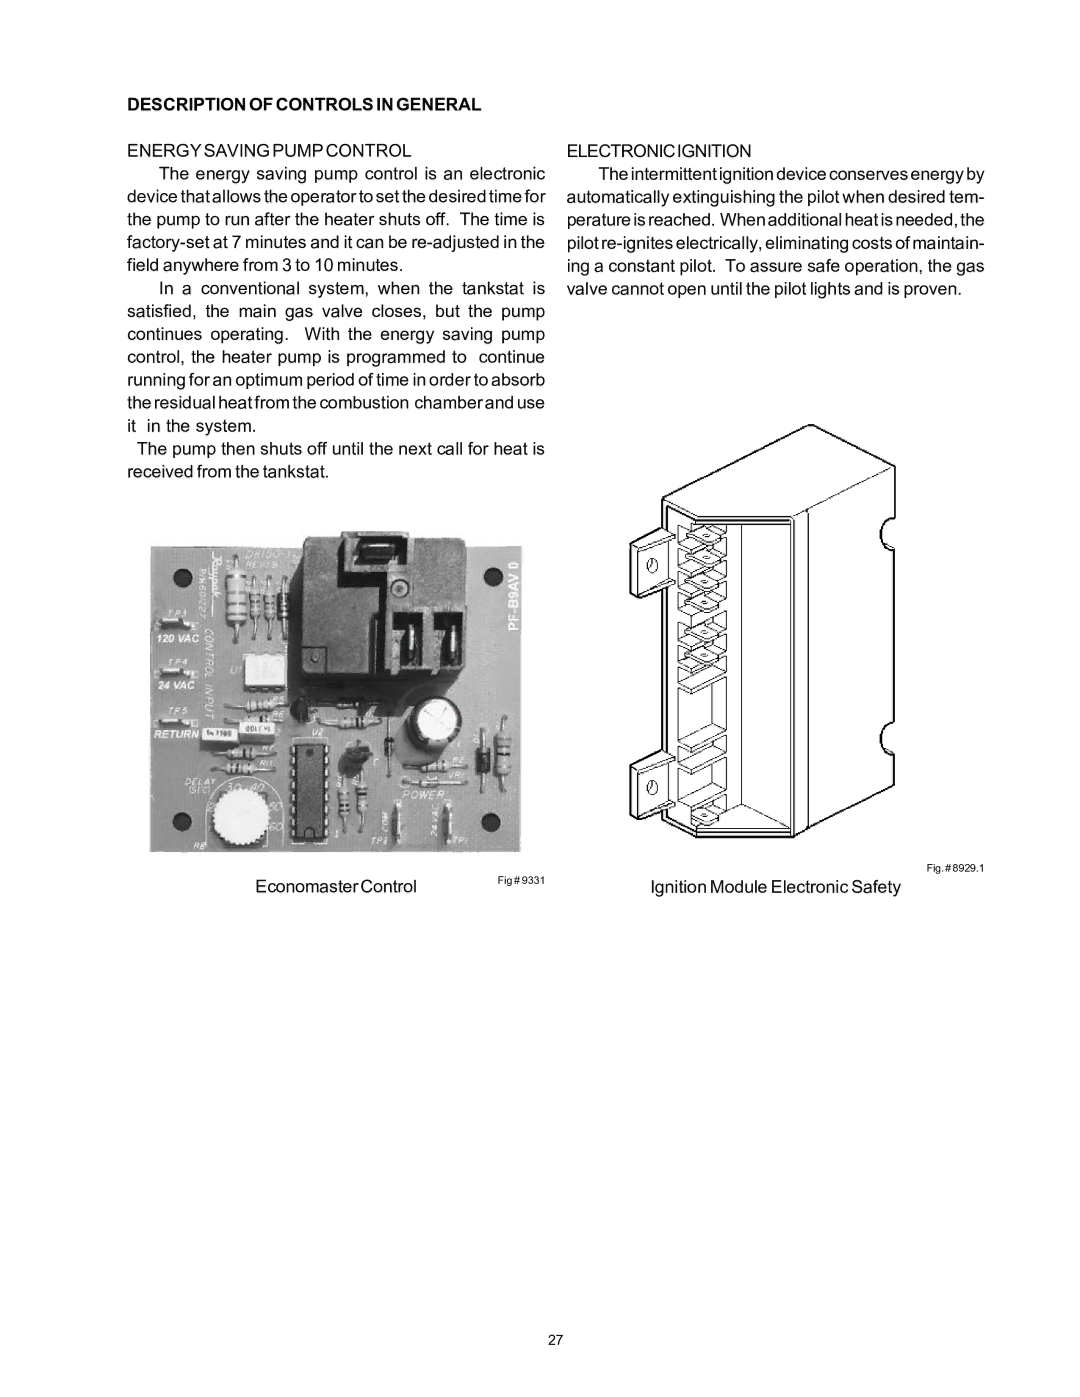 Rheem 136-1826 installation instructions Description of Controls in General, Energy Saving Pump Control, Electronicignition 